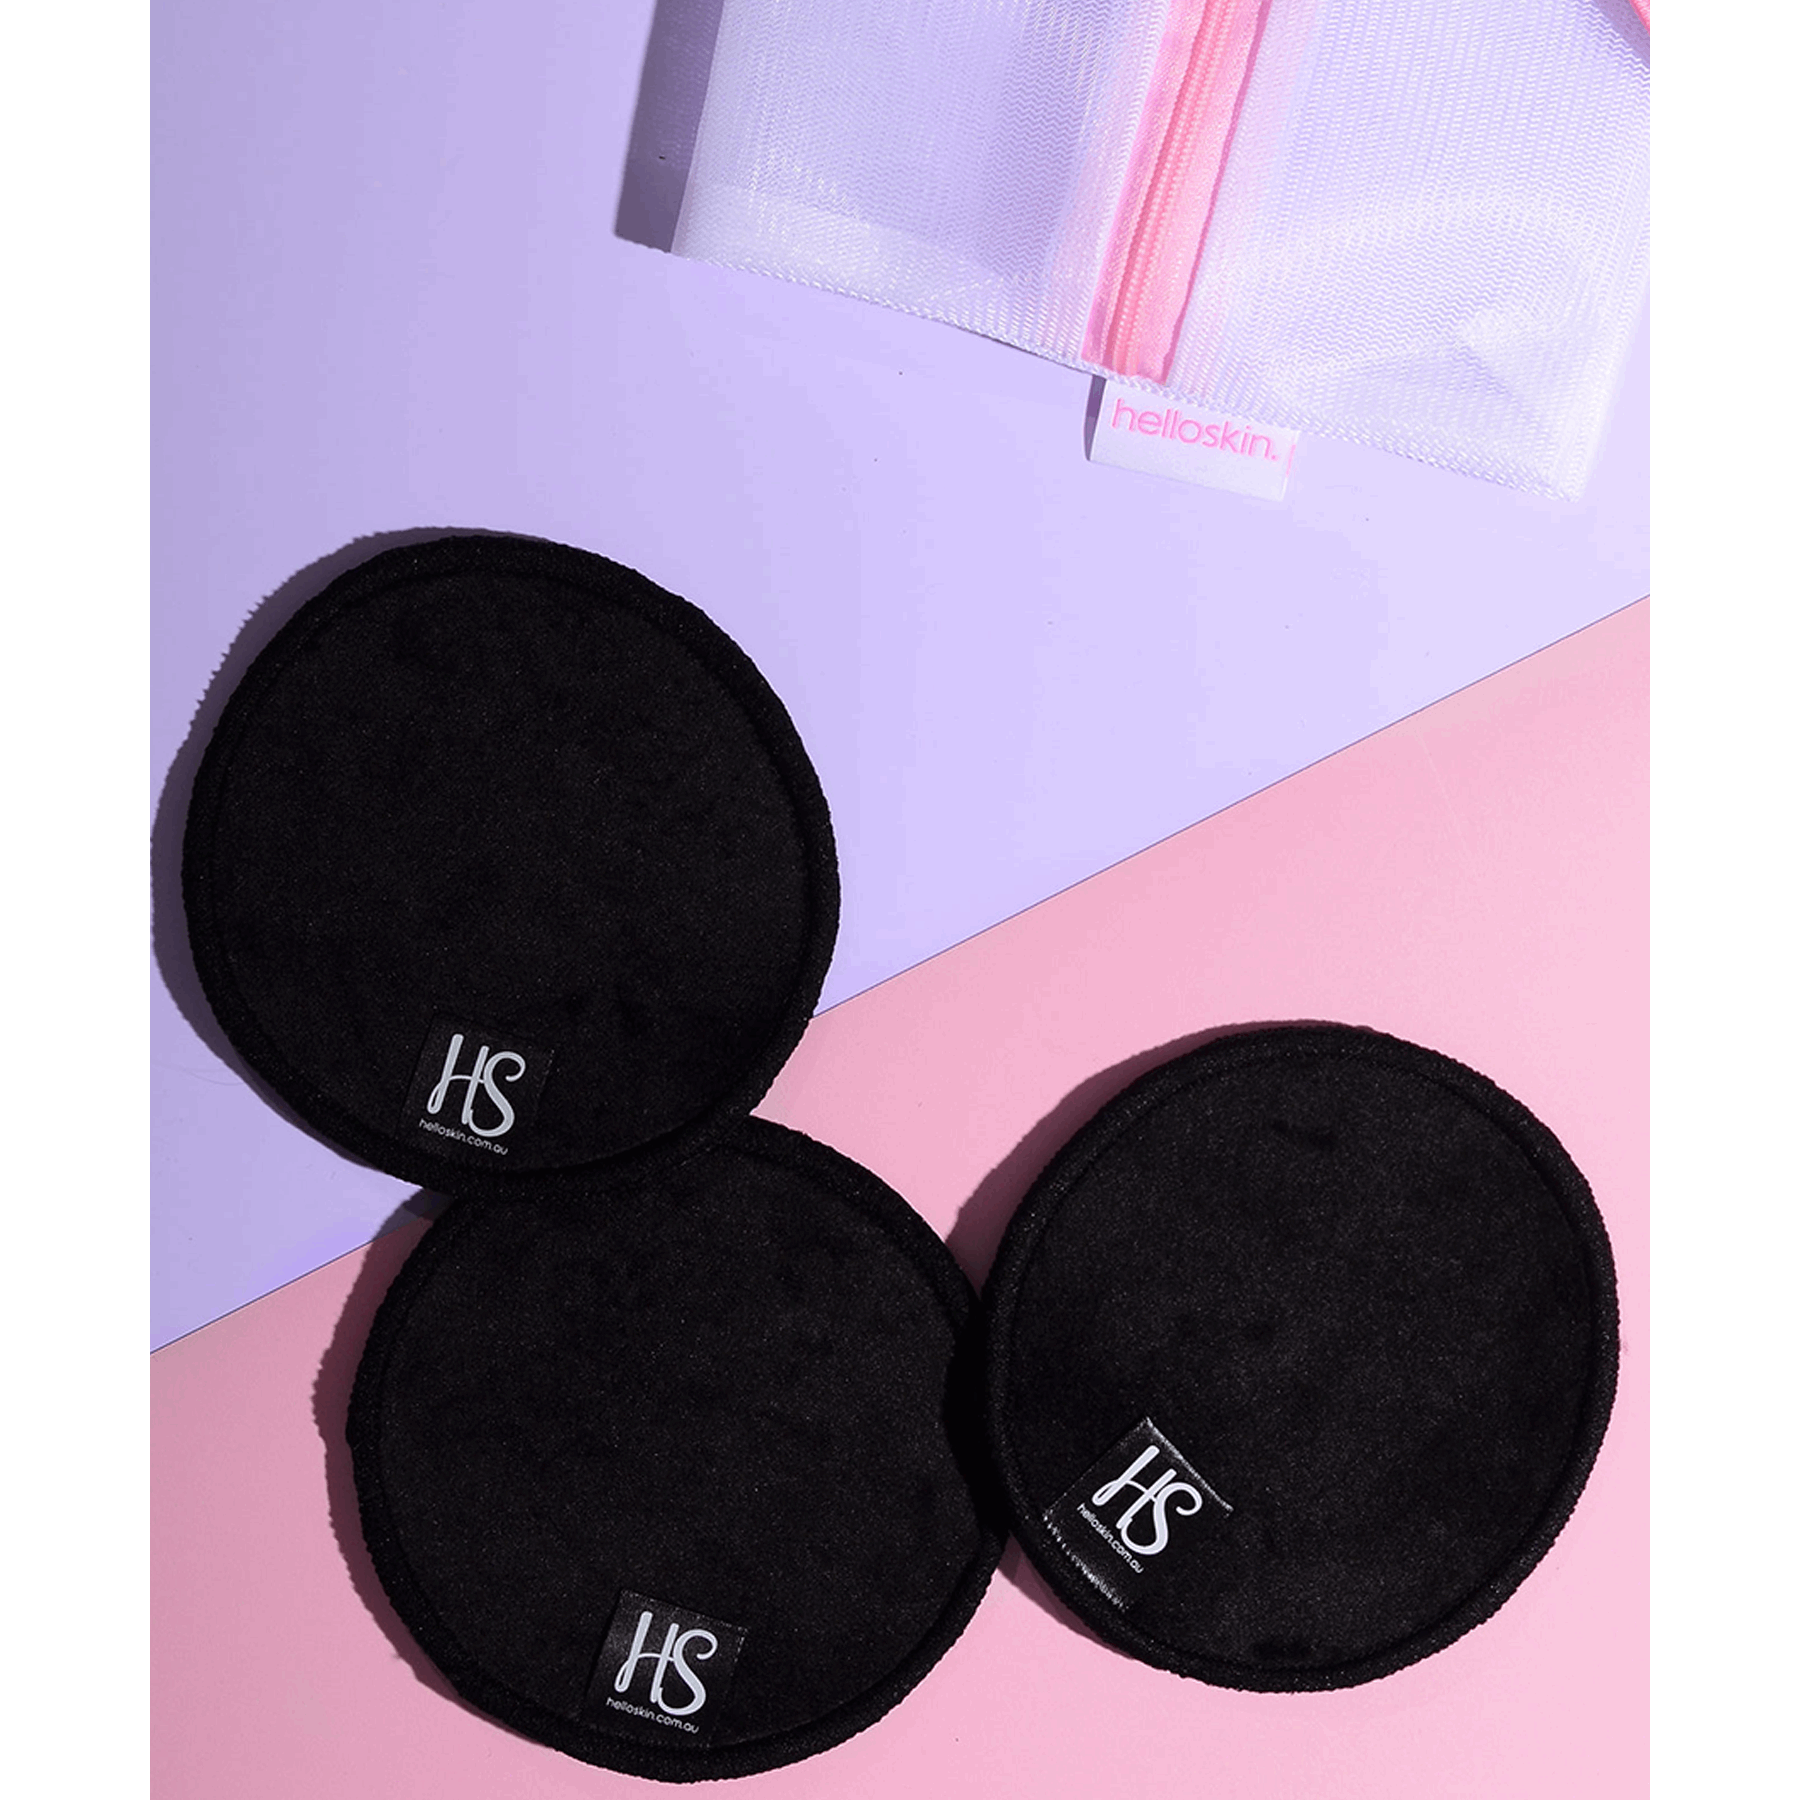 The Luxe Makeup Remover Pad (3Pack) + FREE LAUNDRY BAG